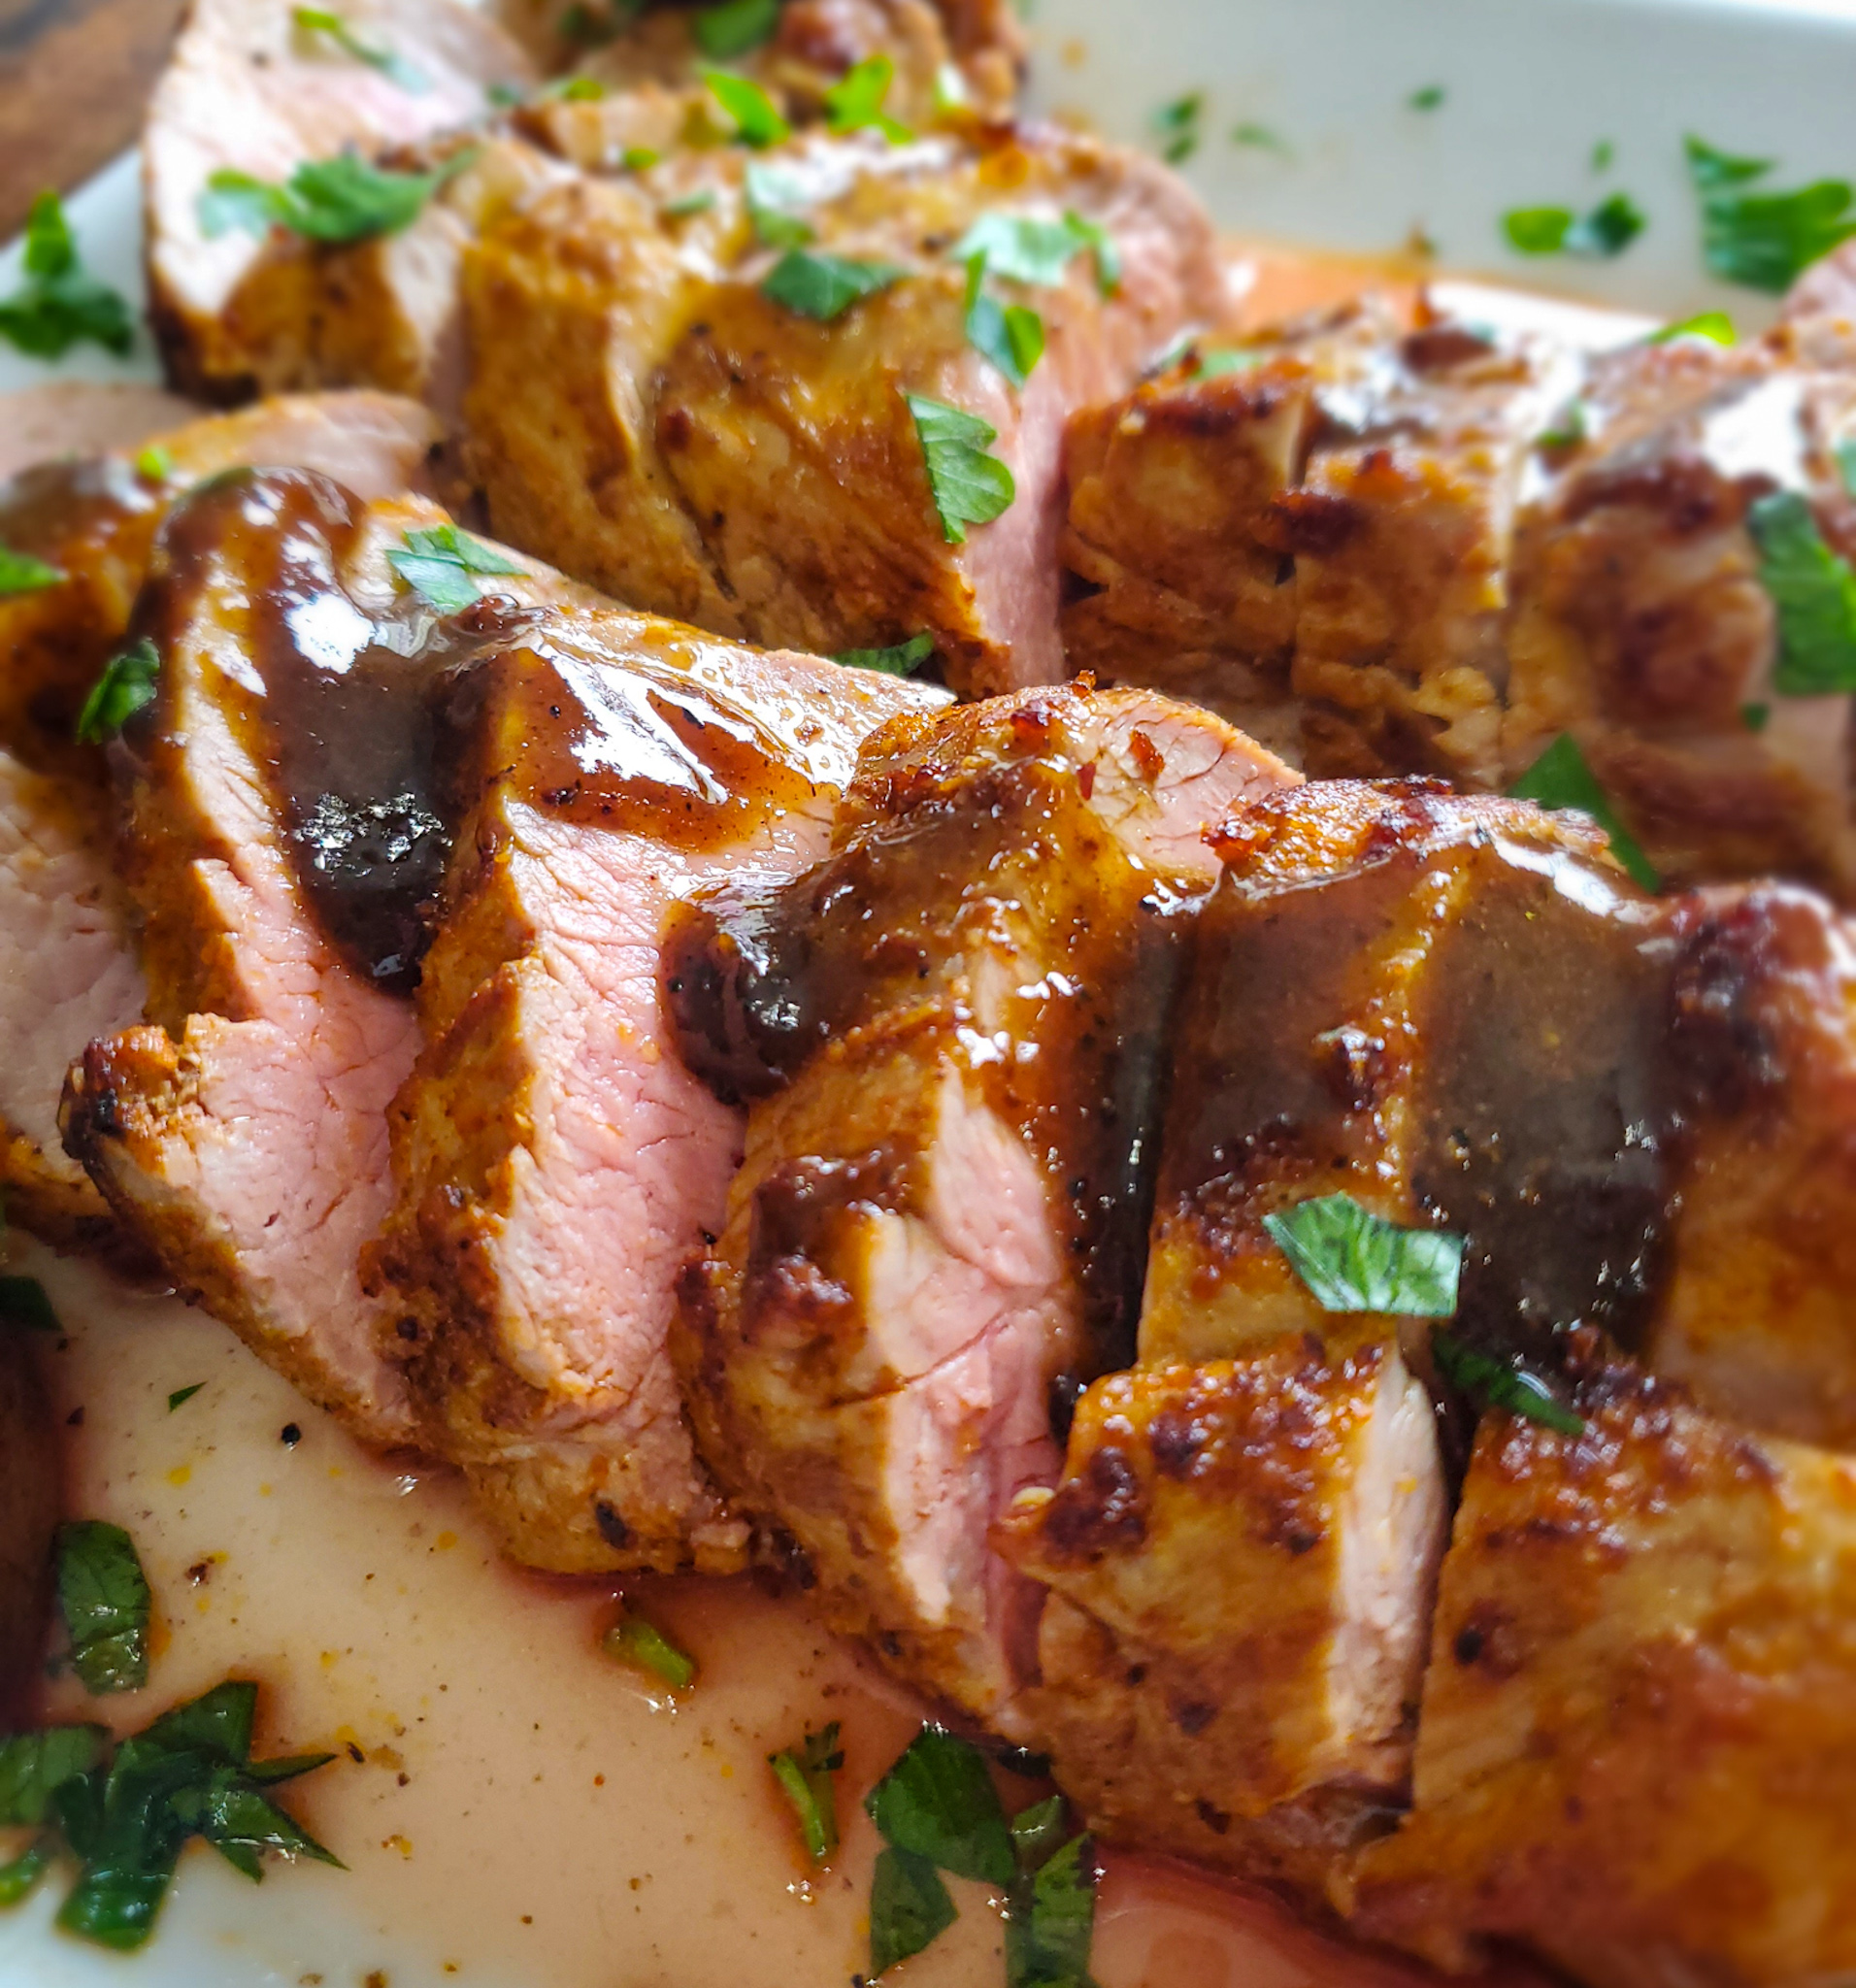 This is the juiciest roasted pork tenderloin recipe ever! It's coated in a simple spice rub.